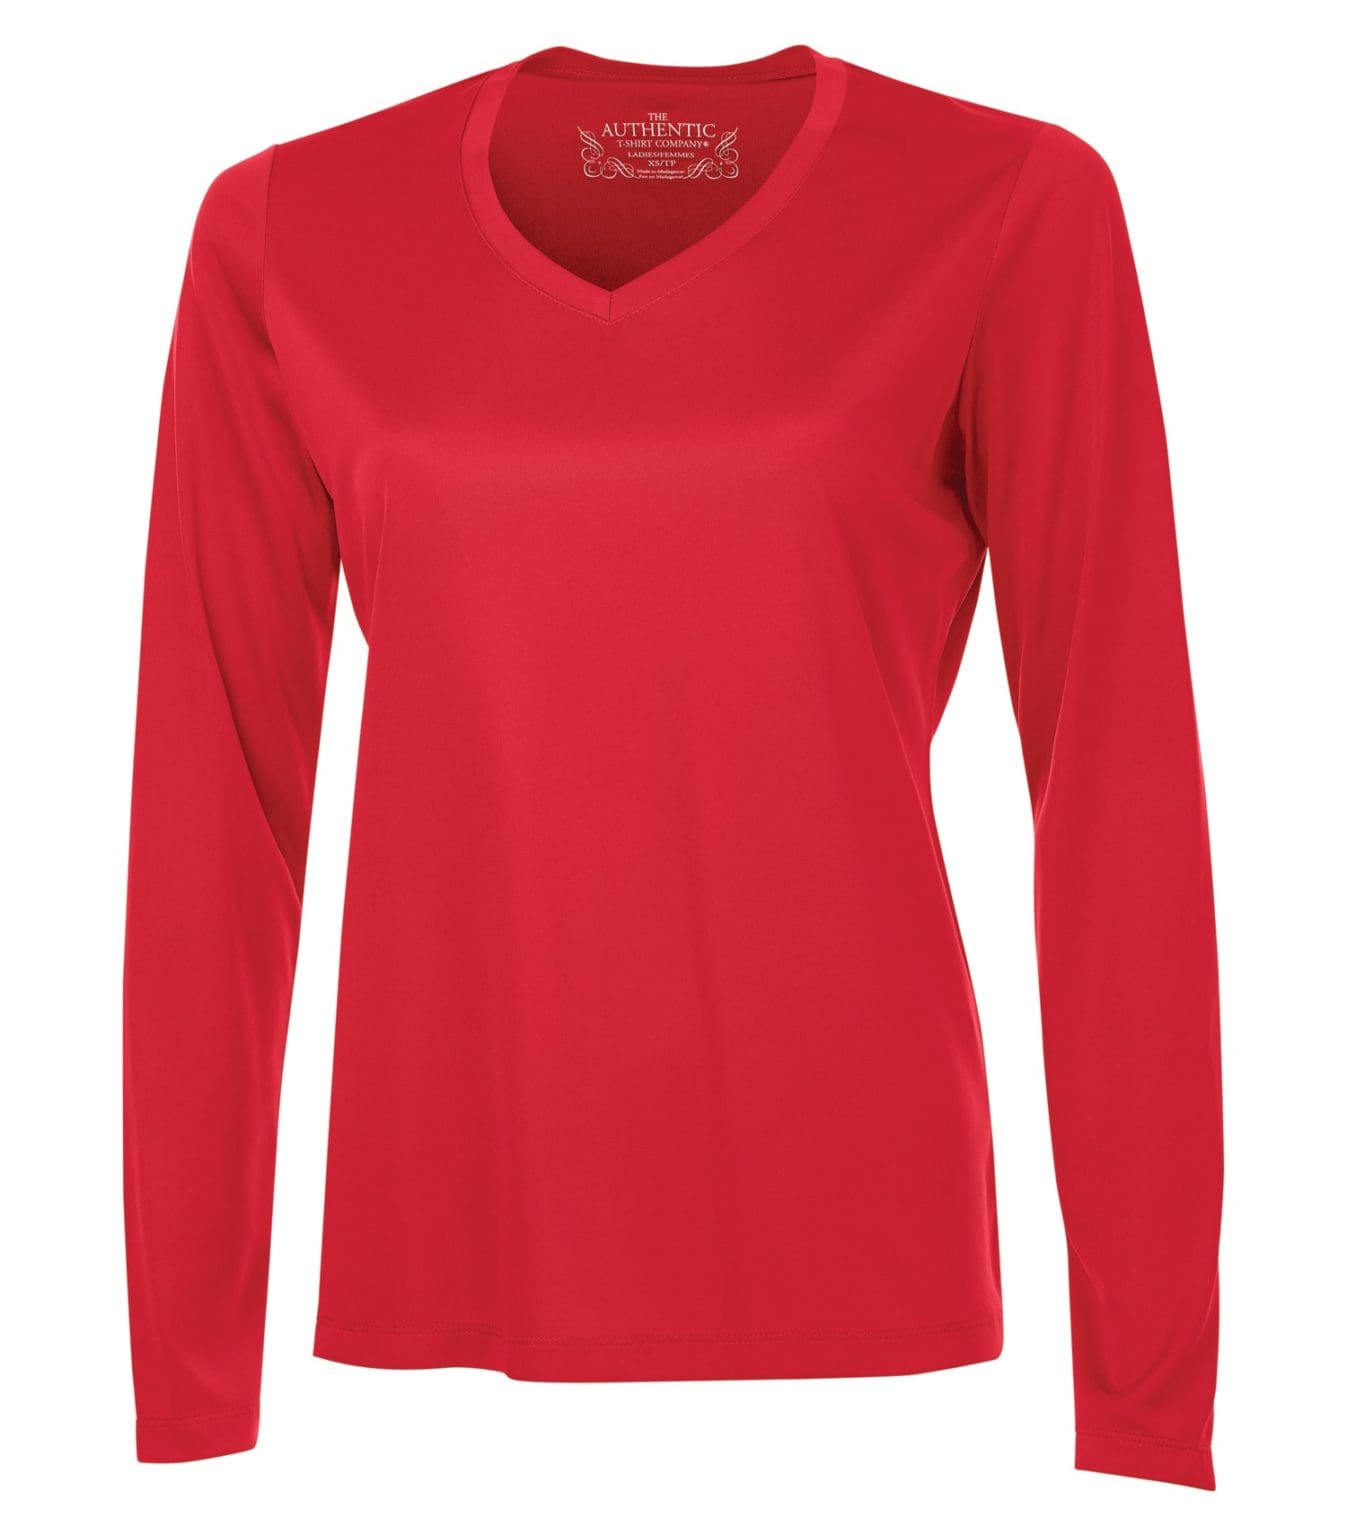 ATC Pro Team Long Sleeve V-neck Ladies' Tee for embroidery or screen ...